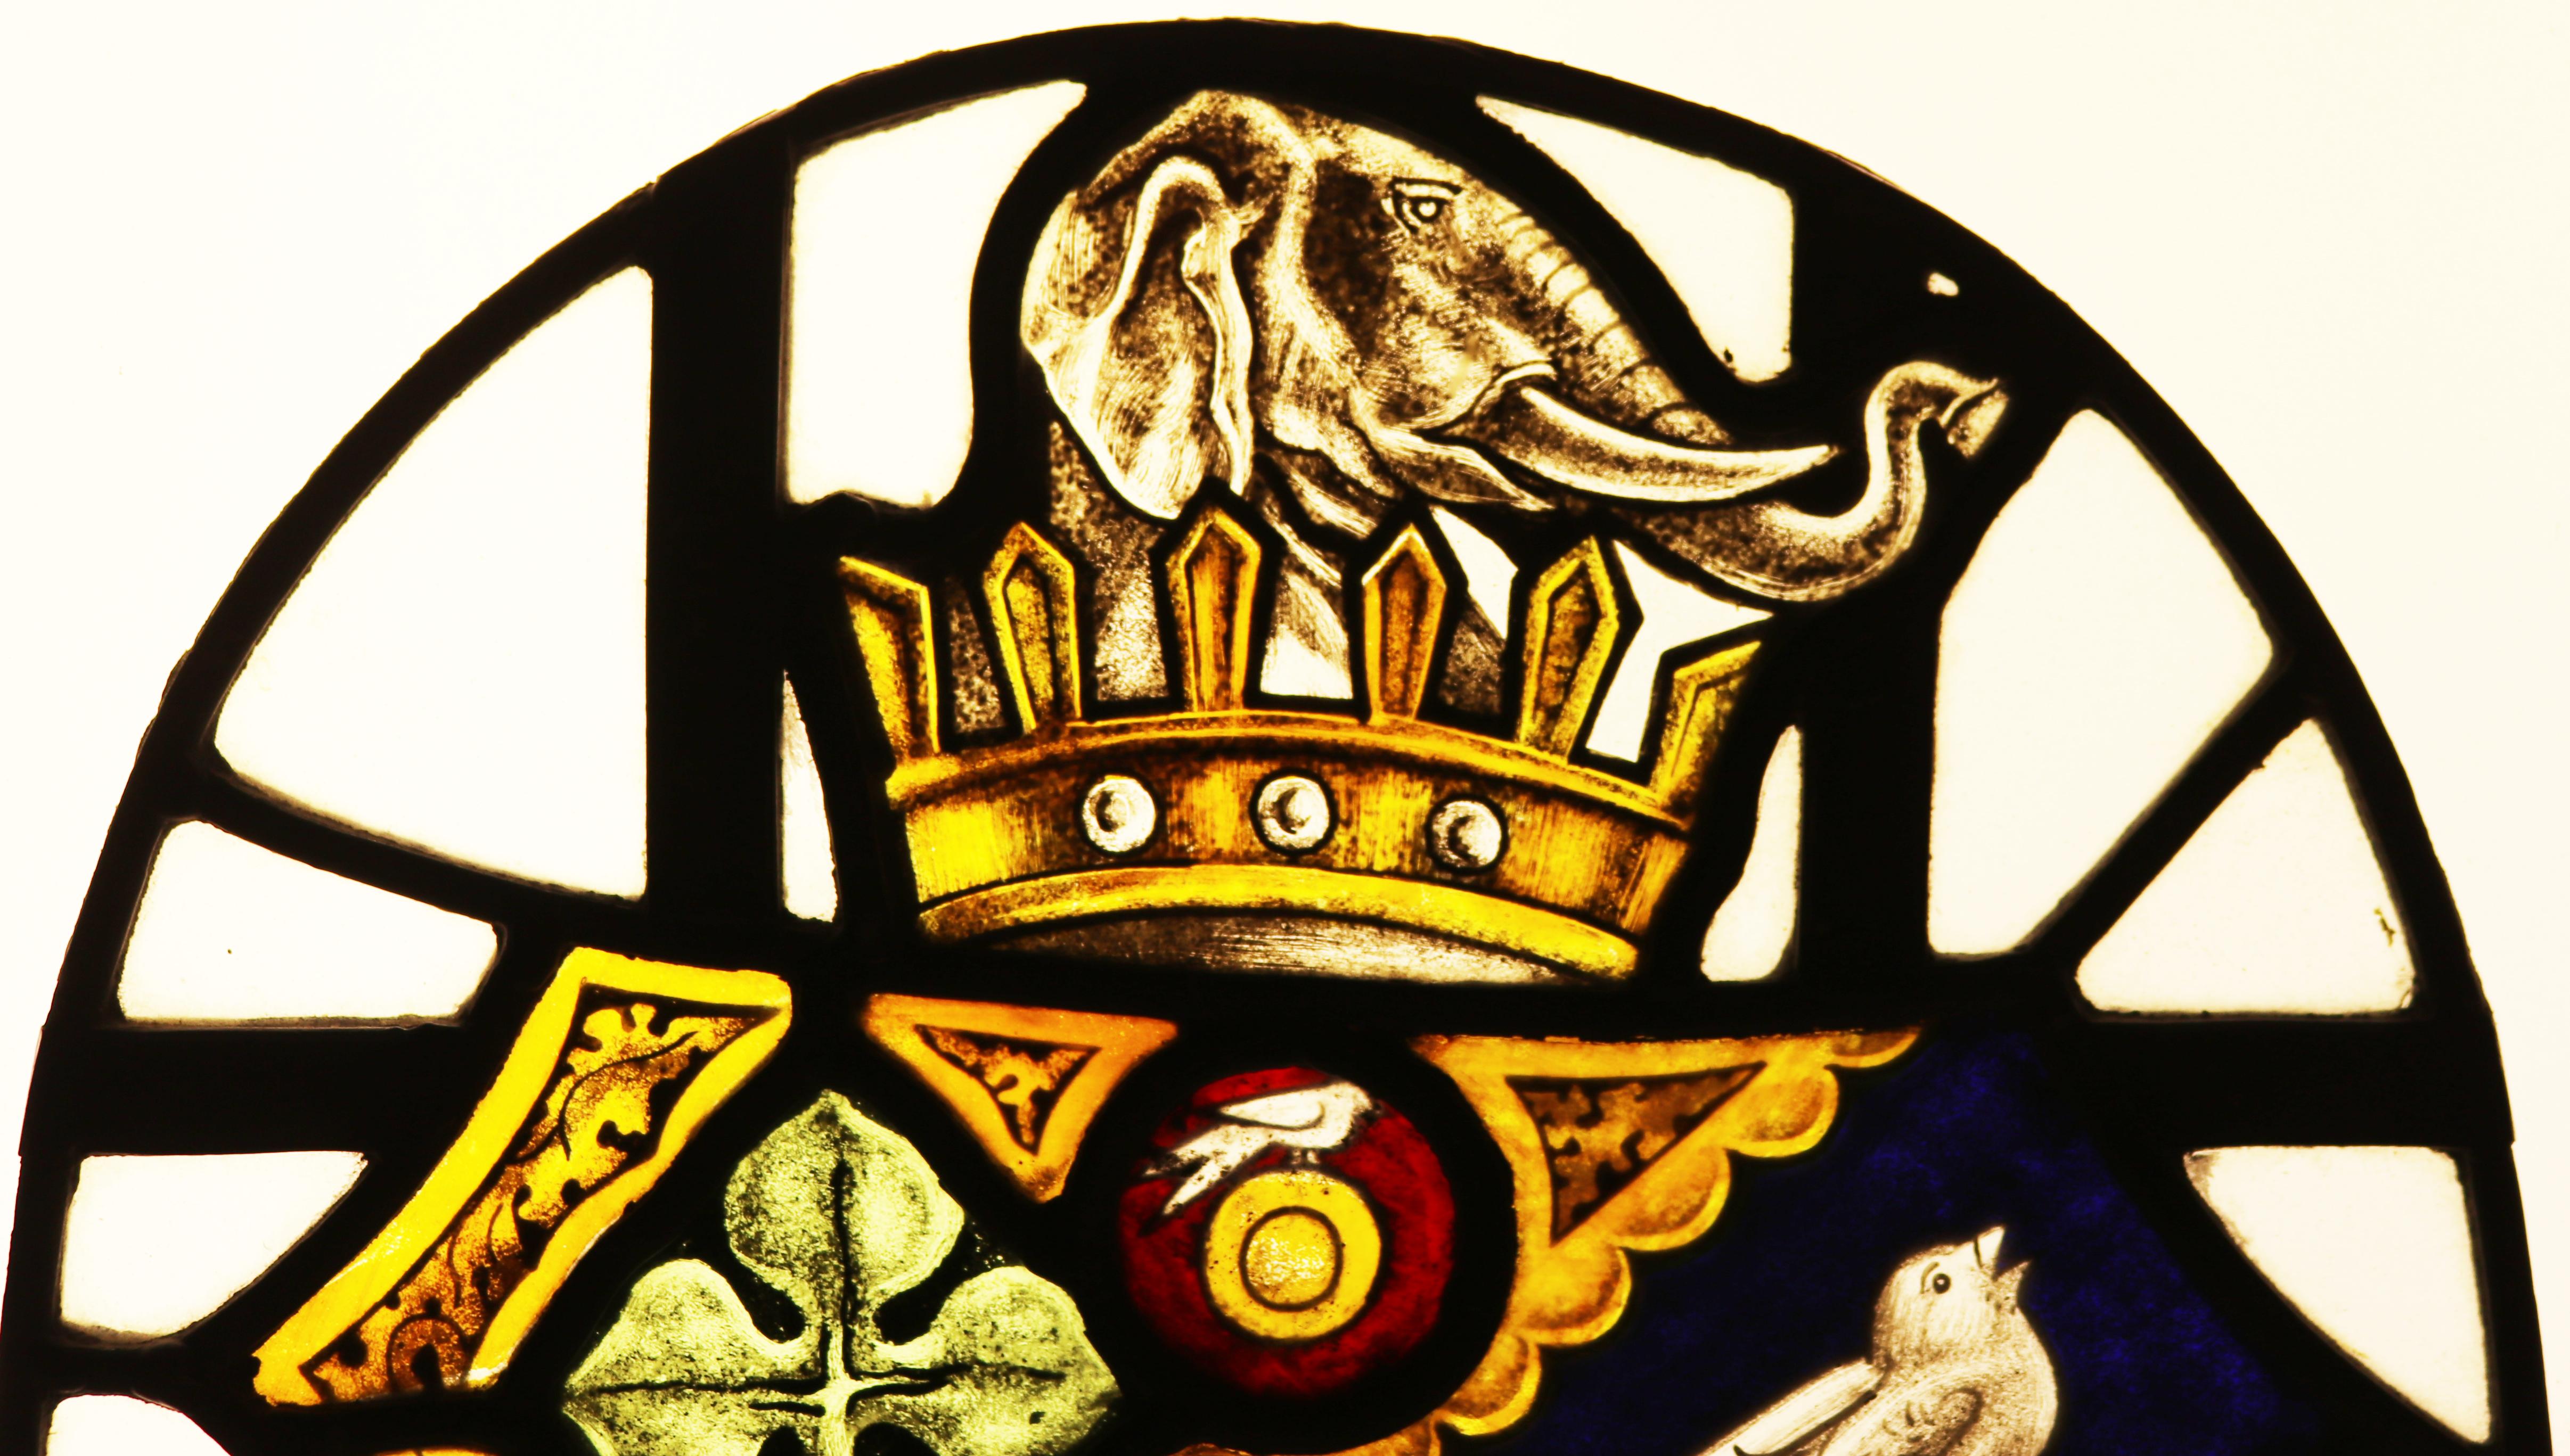 A stained glass window panel depicting a coat of arms, featuring a crown, elephant, song birds and clover. Originally fitted to a door.